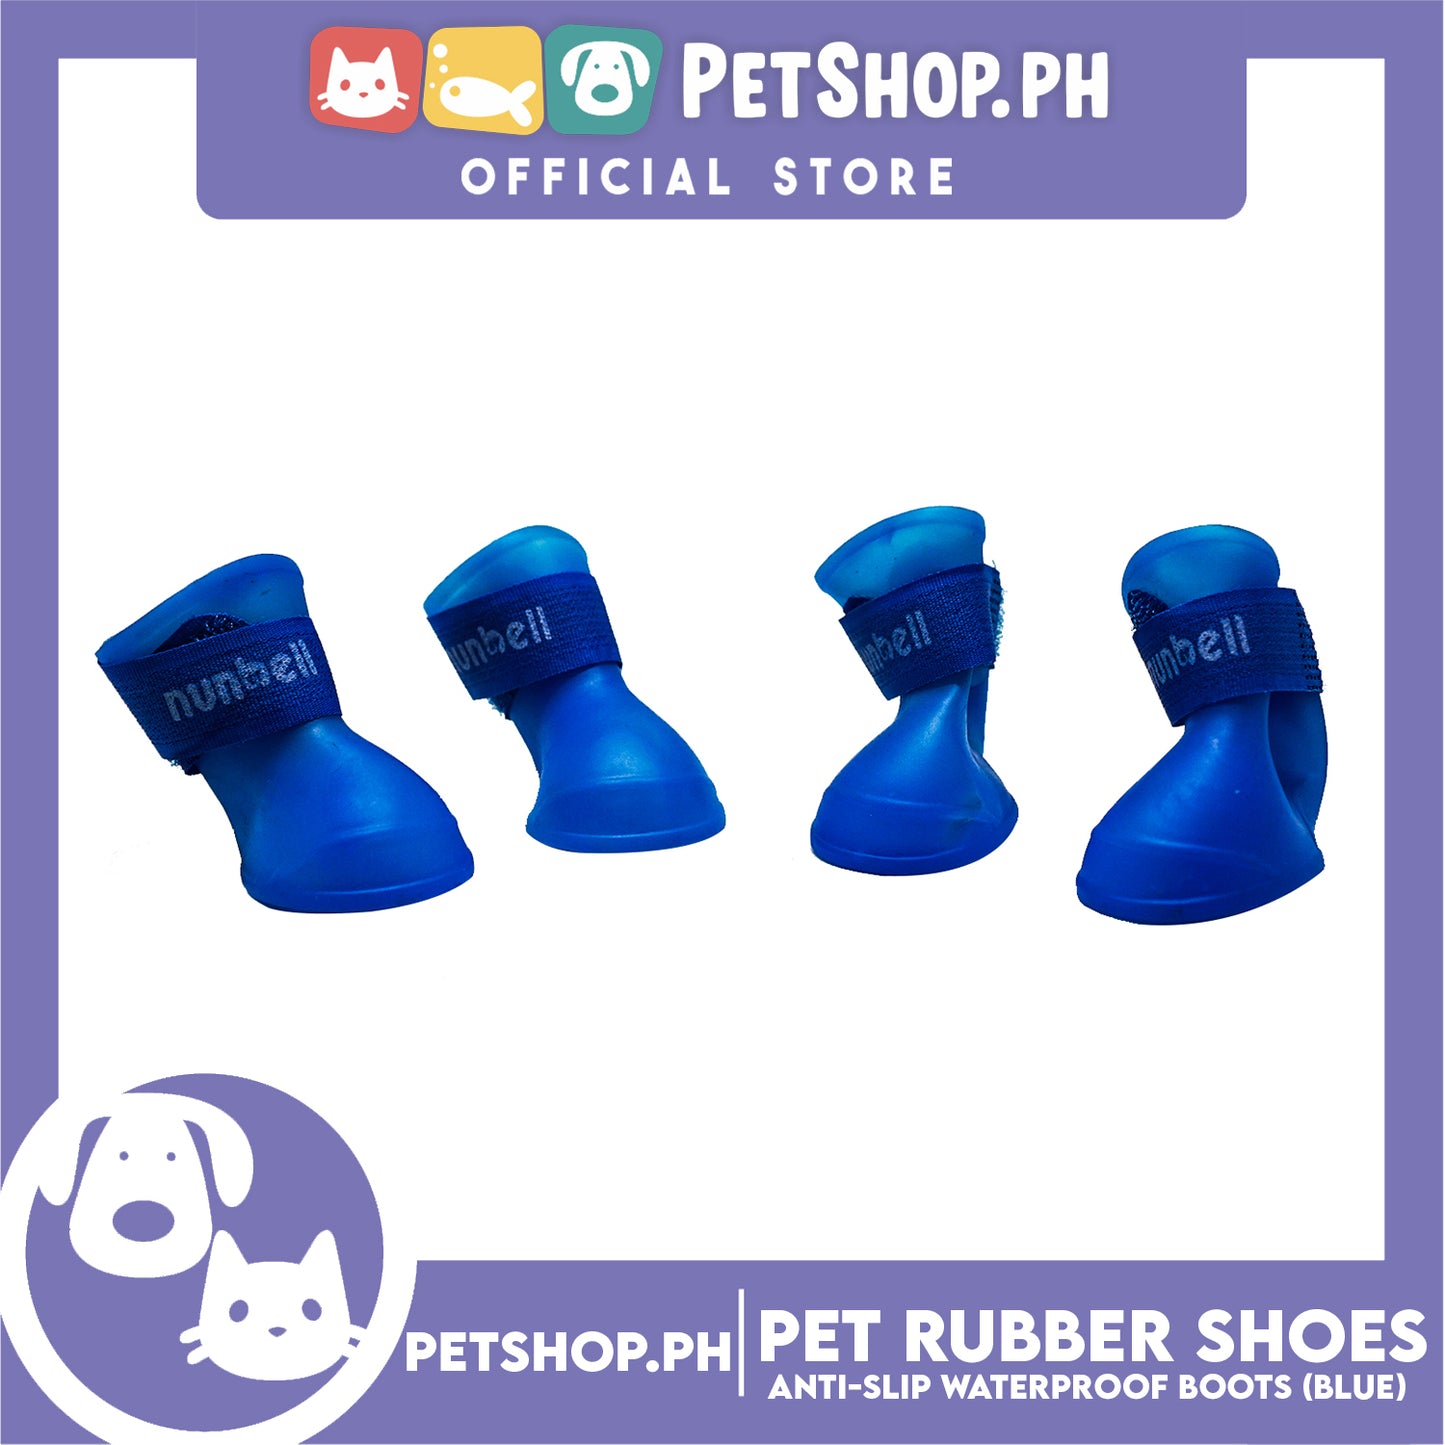 Pet Rubber Rain Shoes Anti-Slip Waterproof Rubber Boots with Paws Cover P6711 - Rubber Boots (Blue)